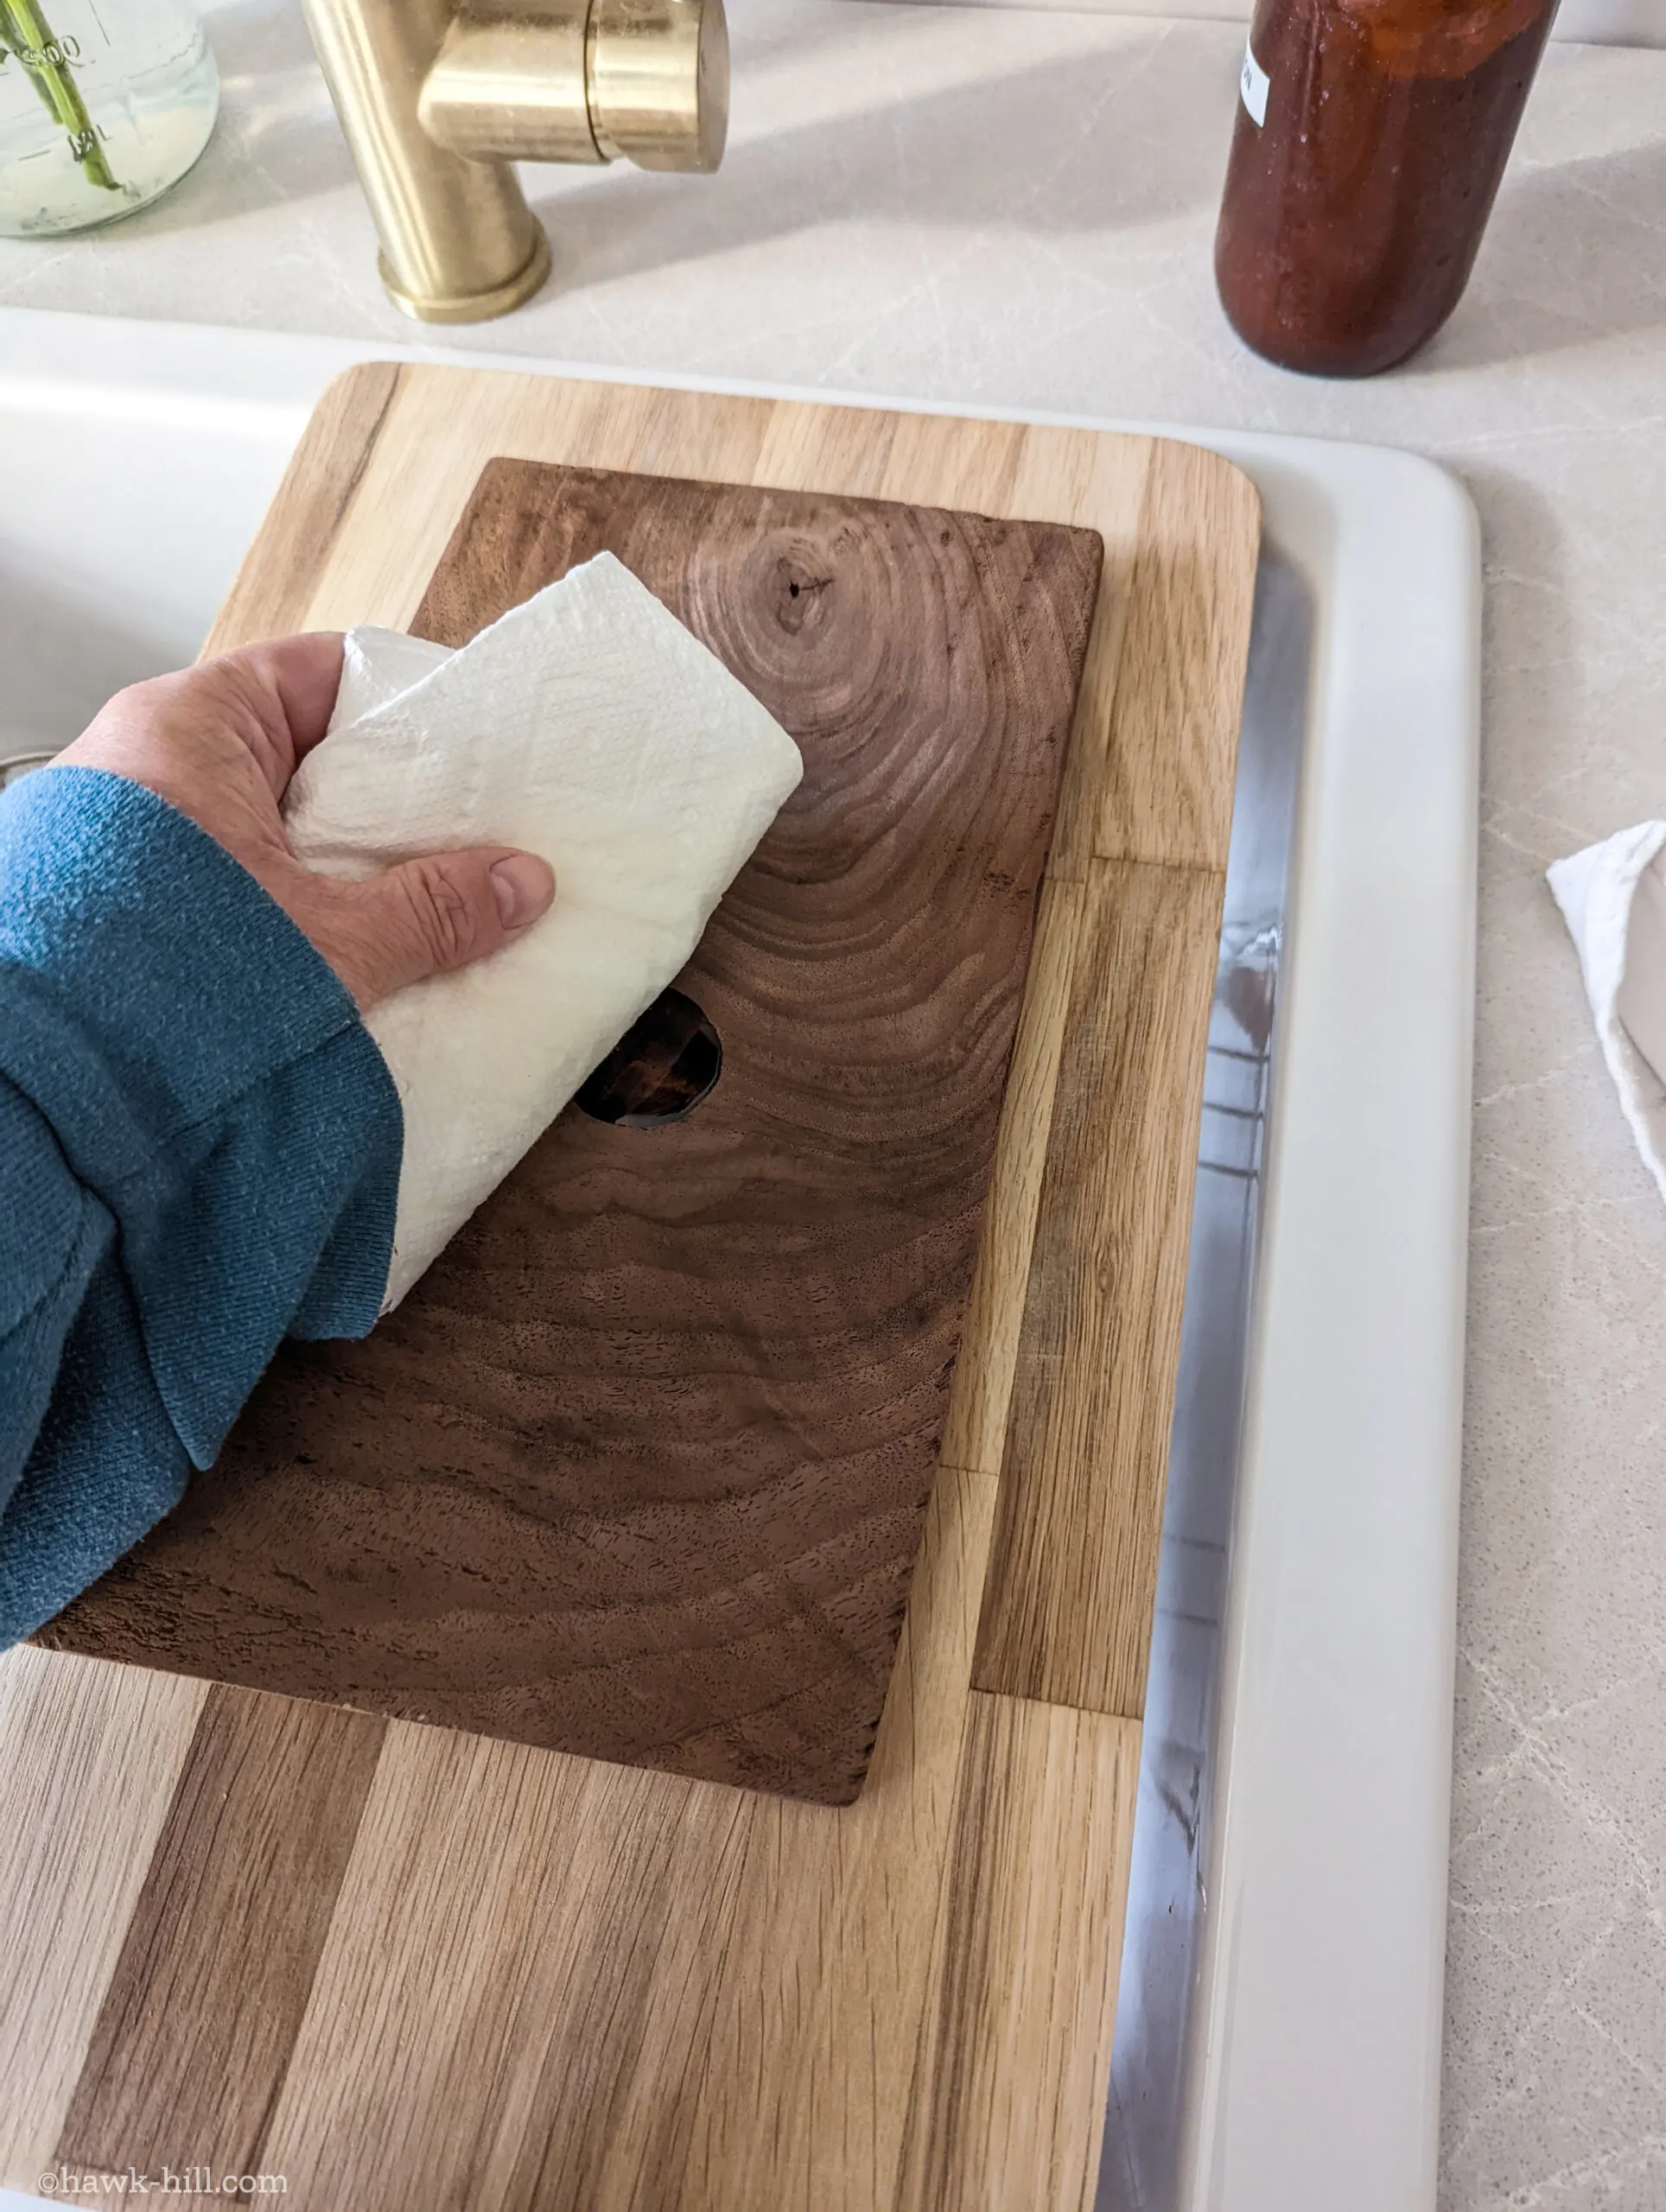 Wiping grape seed oil into the surface of a rustic homemade cheese board.